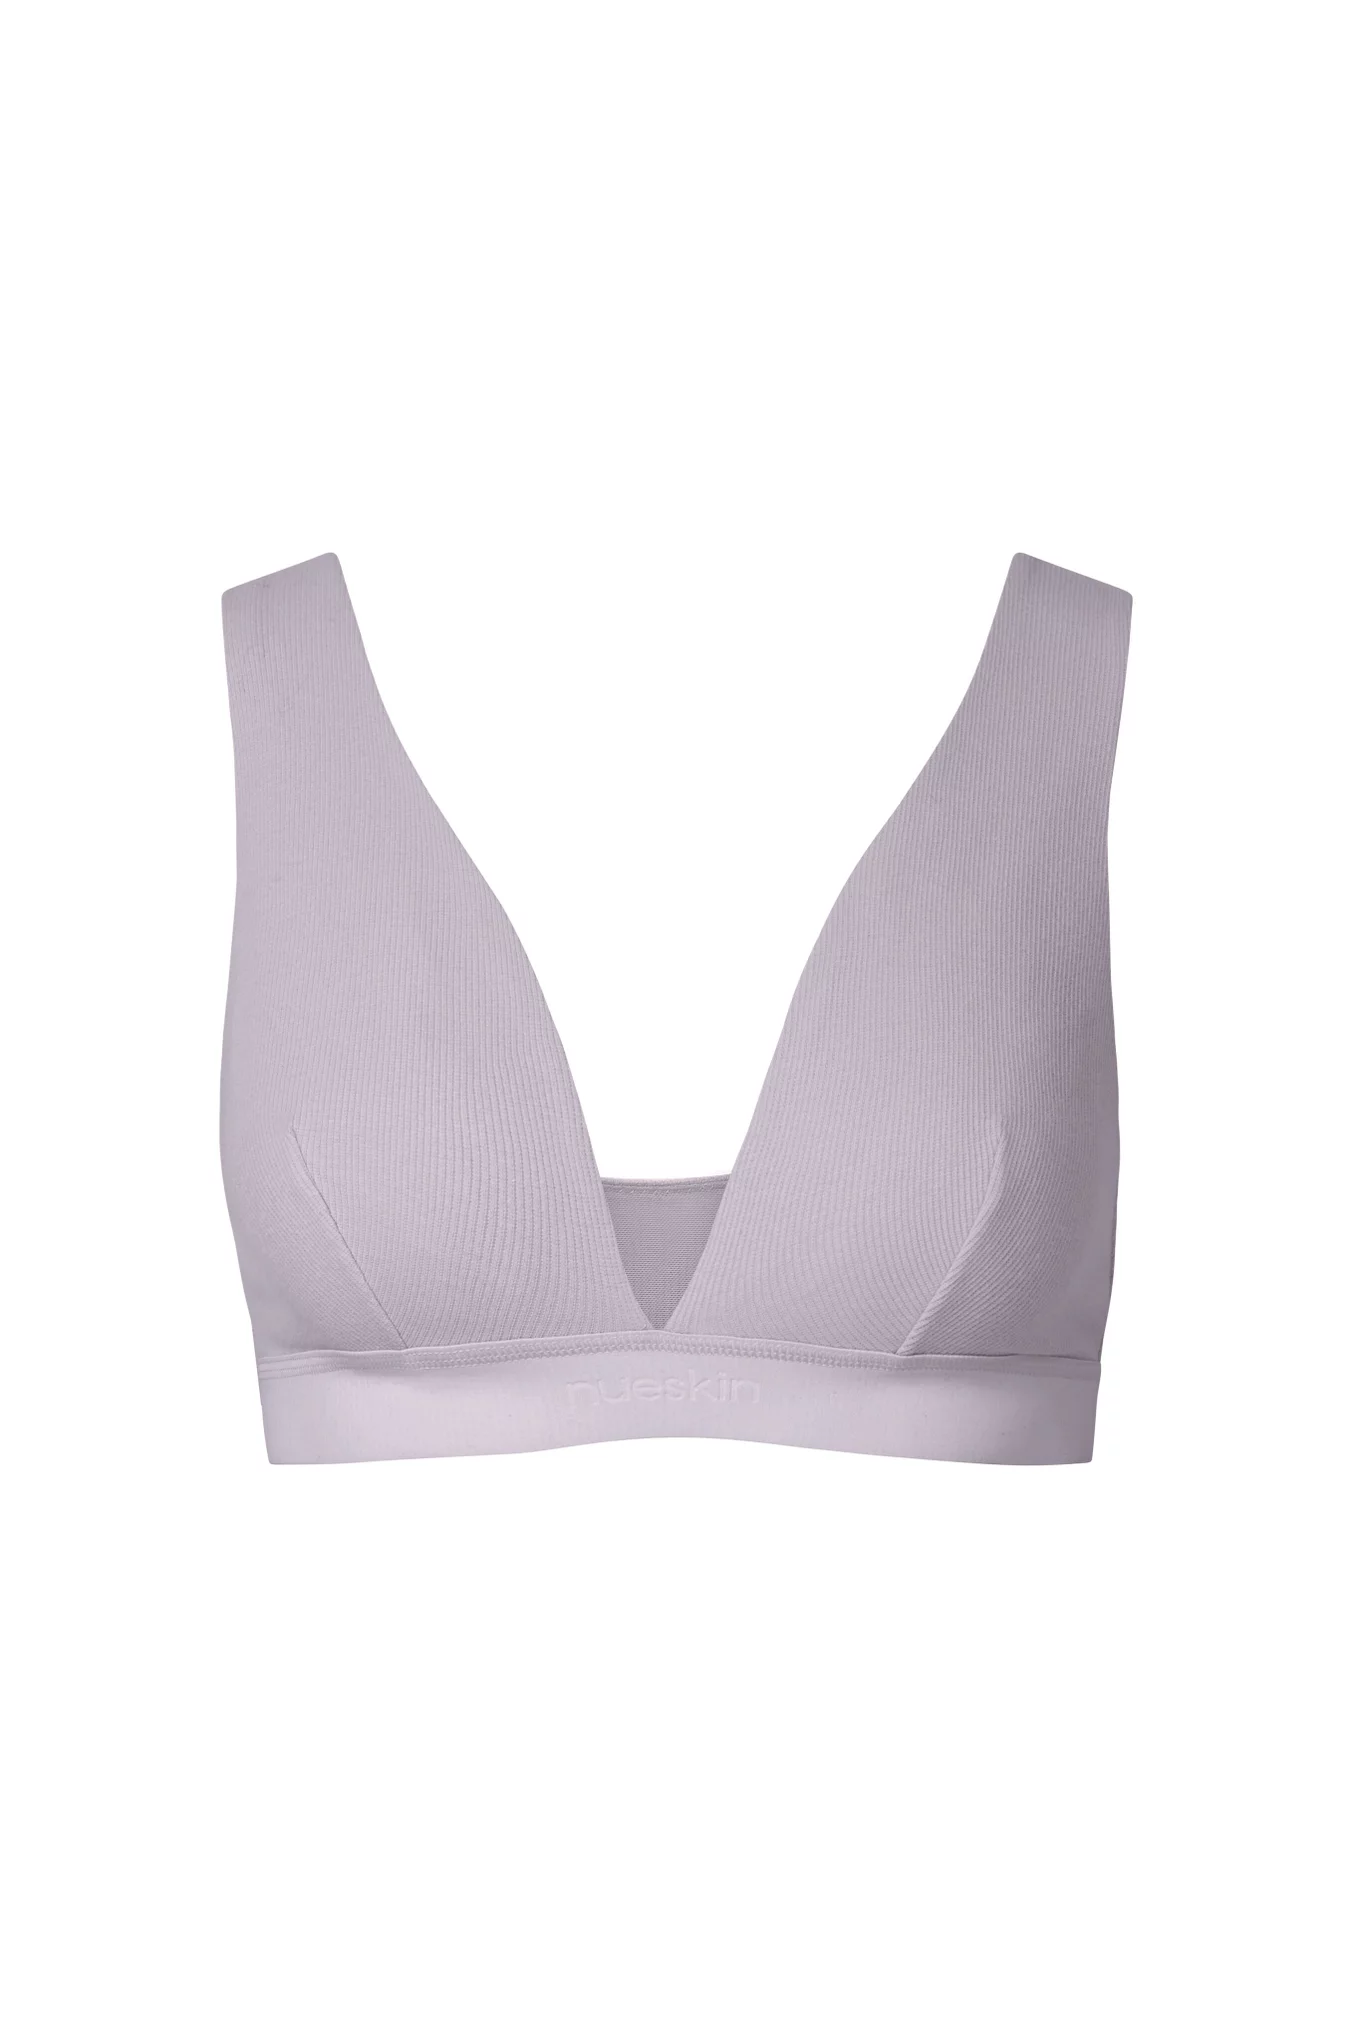 Women's Sports Bra Yoga Without Underwire Yoga Bustier Padded V-Neck  Seamless Sexy Bra Top Non-Wired Vest Plus Size Seamless Unlined Bra Large  Busts Unlined Bra Bralette, beige, S : : Fashion